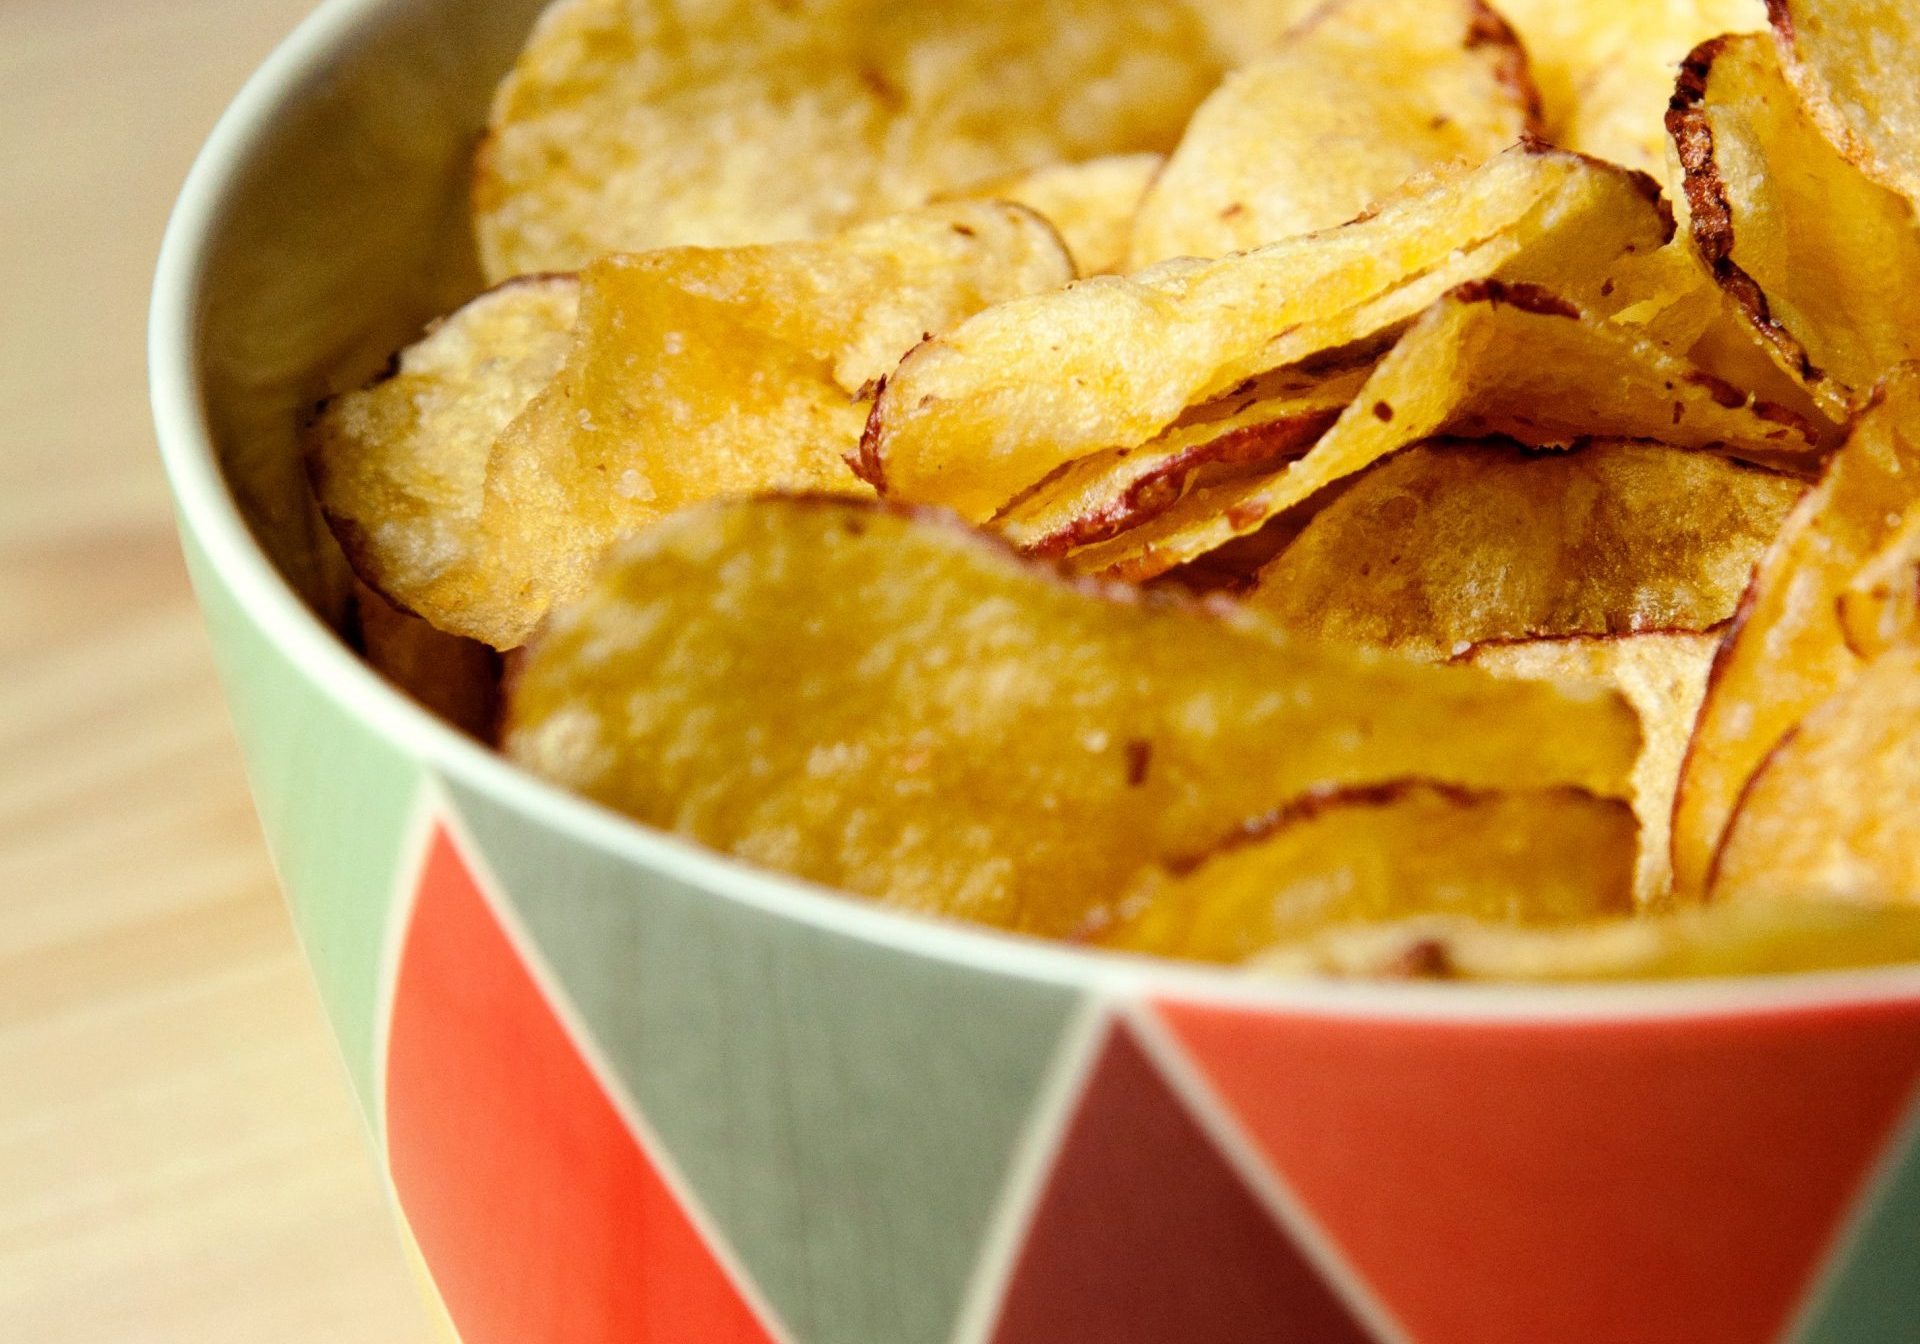 potato crisps chips in a colorful bowl on a wooden table